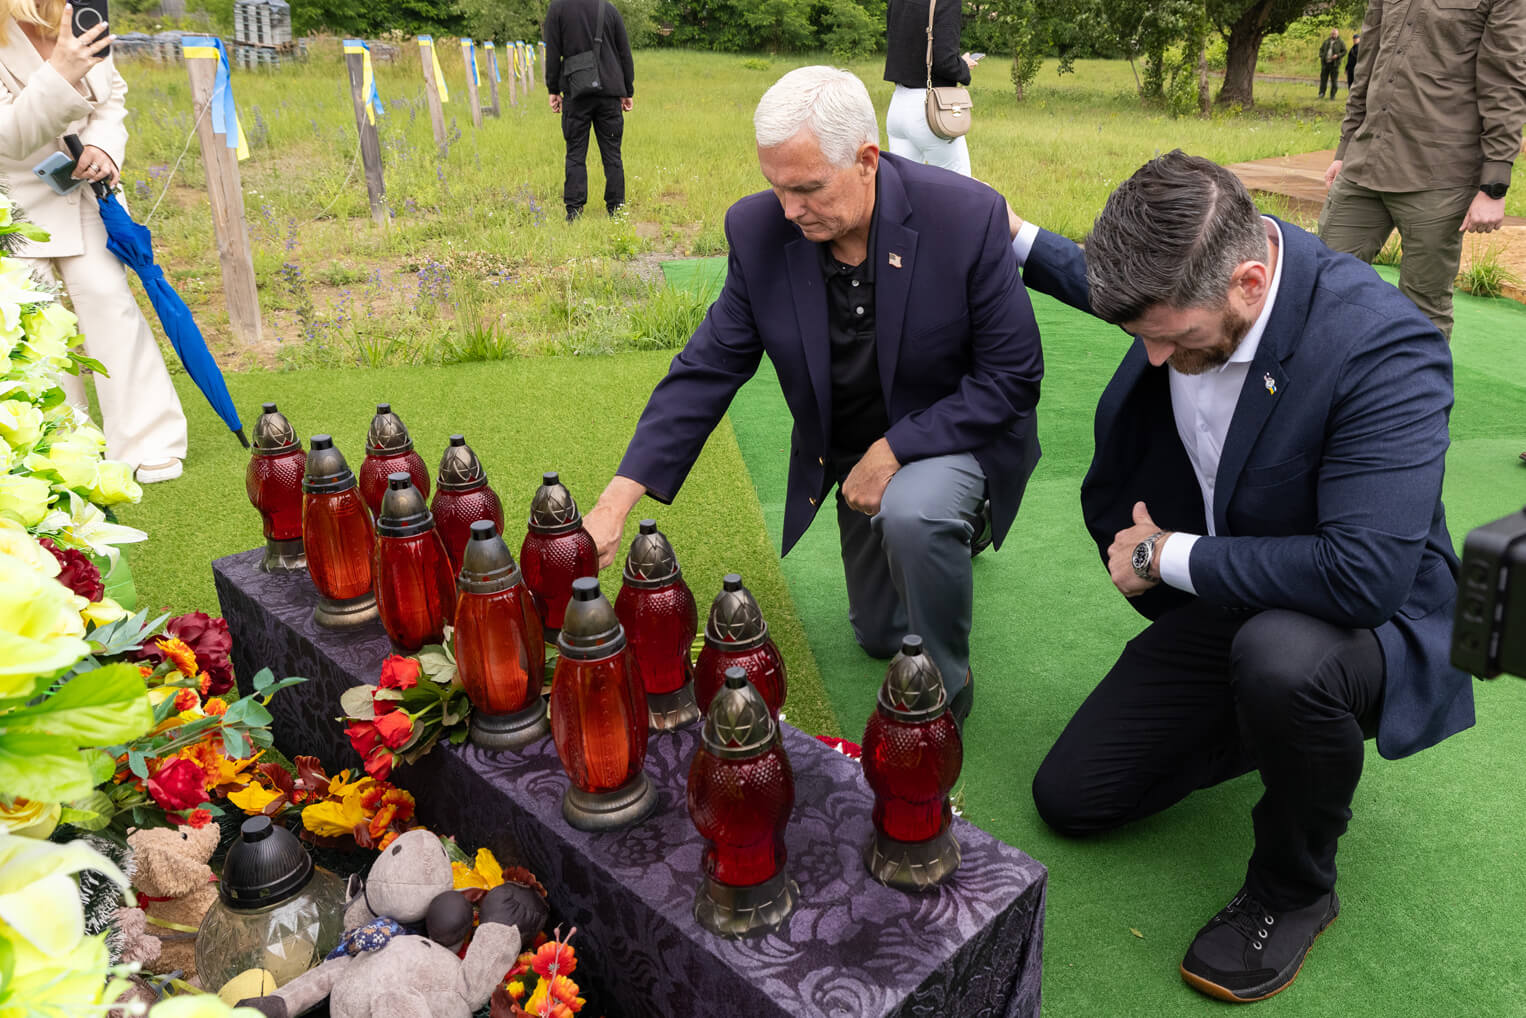 Edward Graham and Mike Pence placed flowers at a memorial for those killed in the war with Russia.